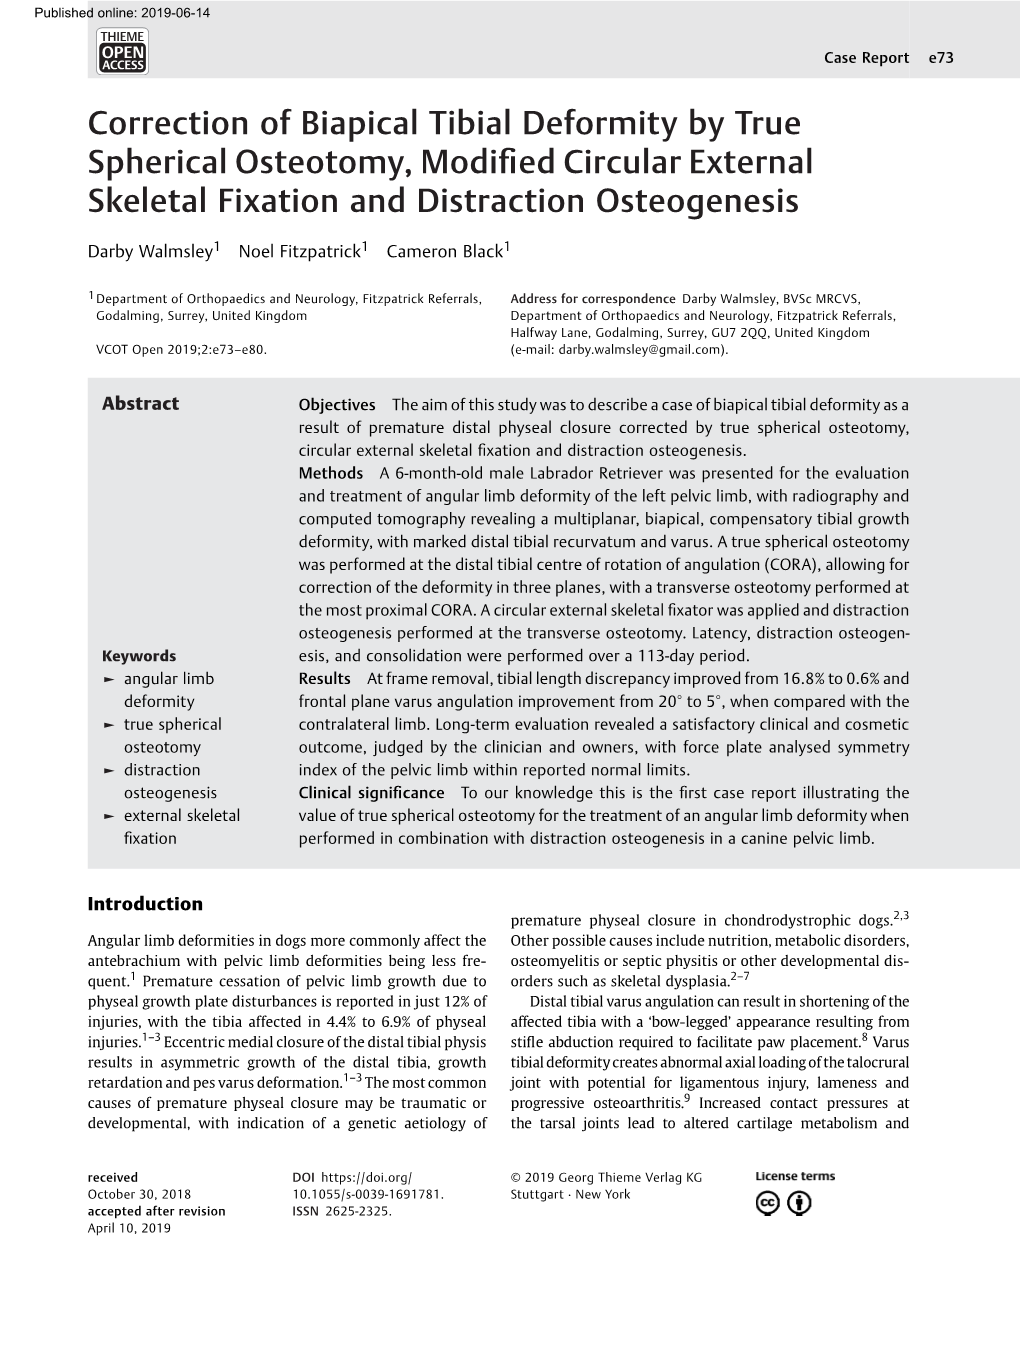 Correction of Biapical Tibial Deformity by True Spherical Osteotomy, Modified Circular External Skeletal Fixation and Distractio